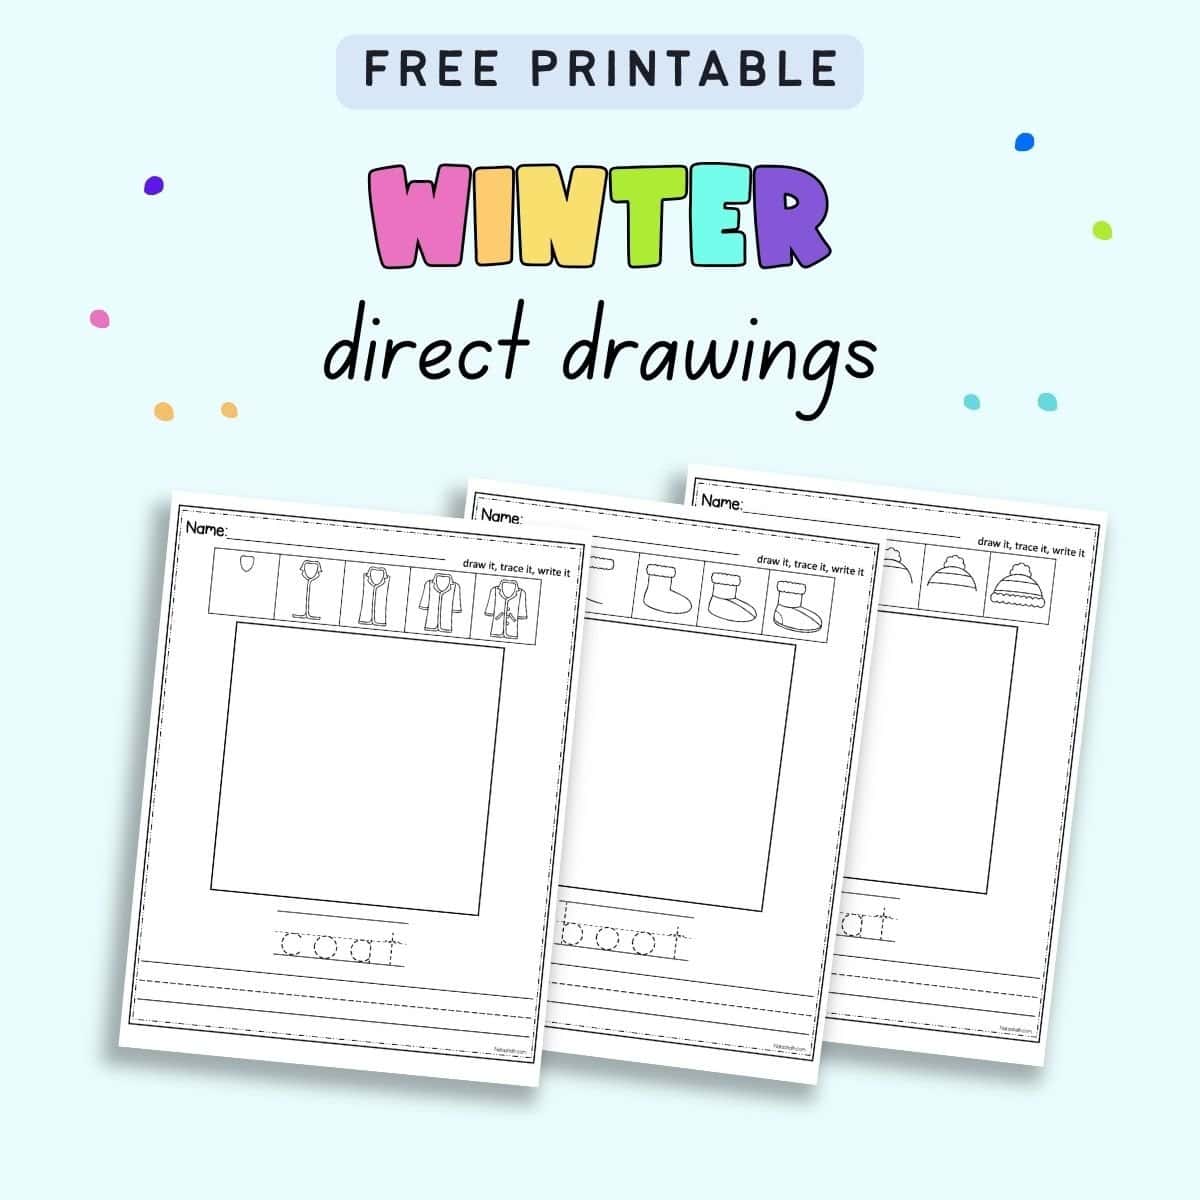 Text "free printable winter directed drawings" with a  preview of directed drawing worksheets for a coat, a boot, an d ahat